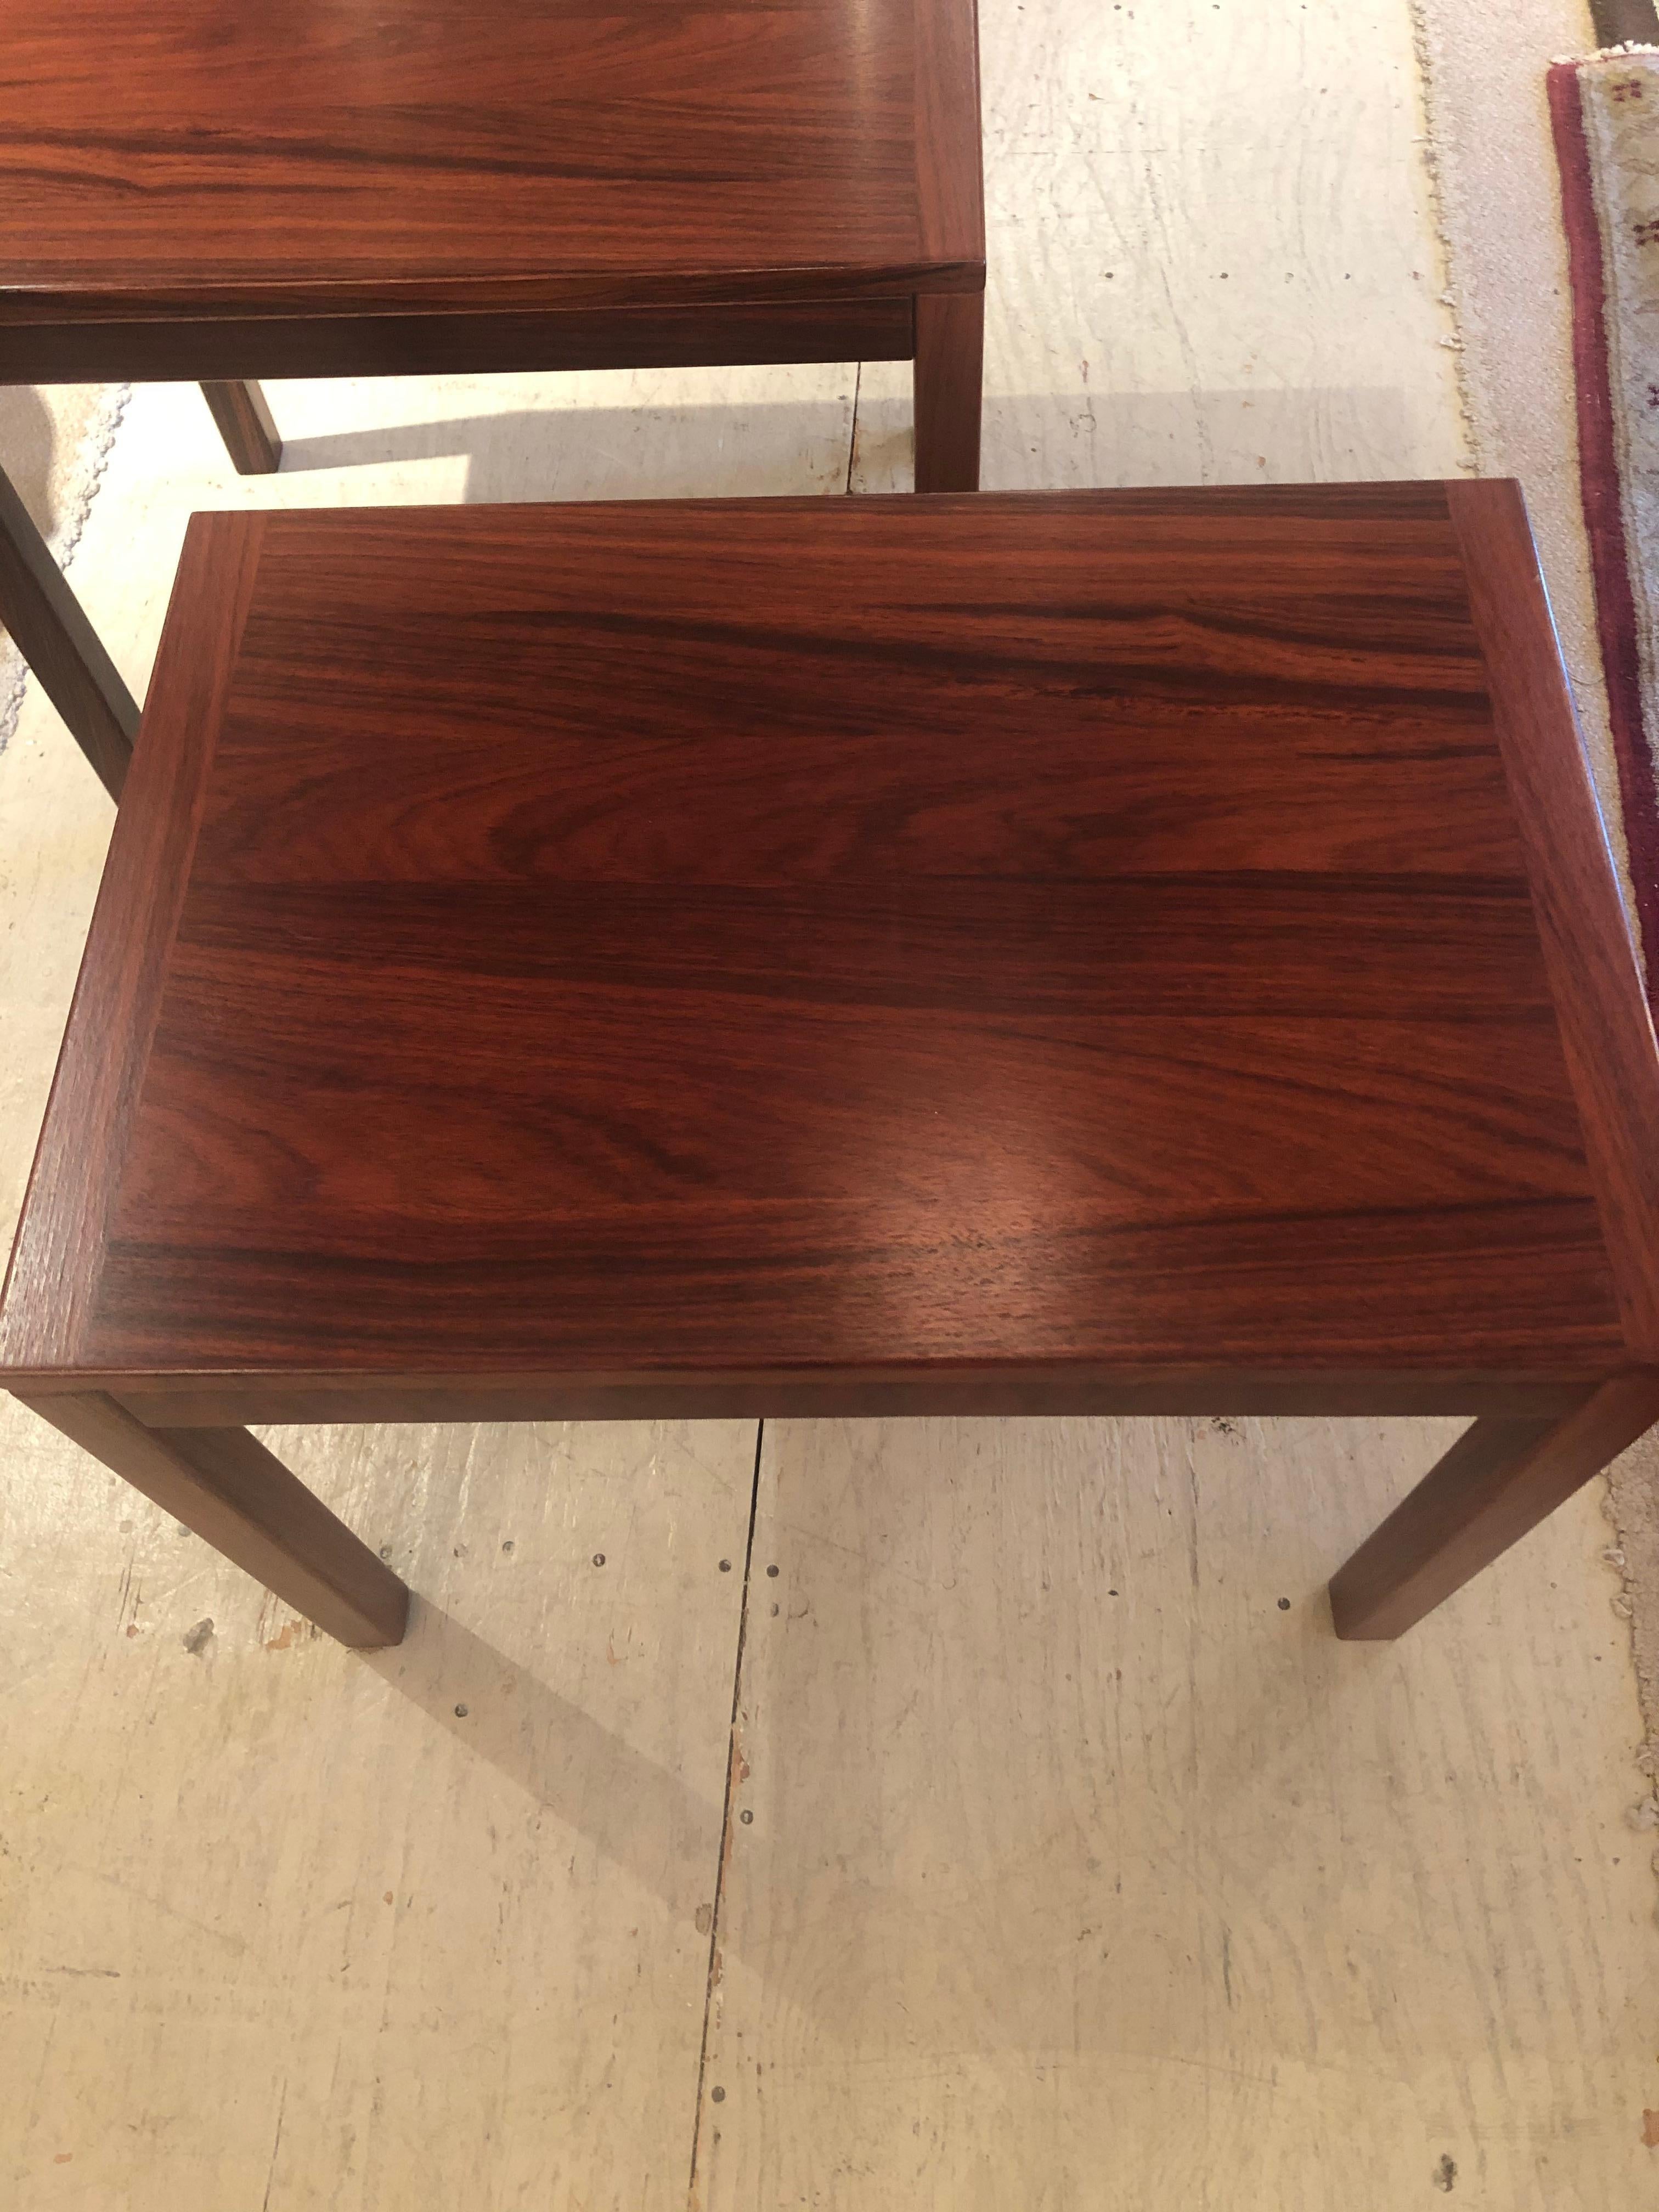 Danish Mid-Century Modern pair of richly stained and beautifully grained sleek rectangular end tables with box edges and elegant simple square legs. Stamped on bottoms.